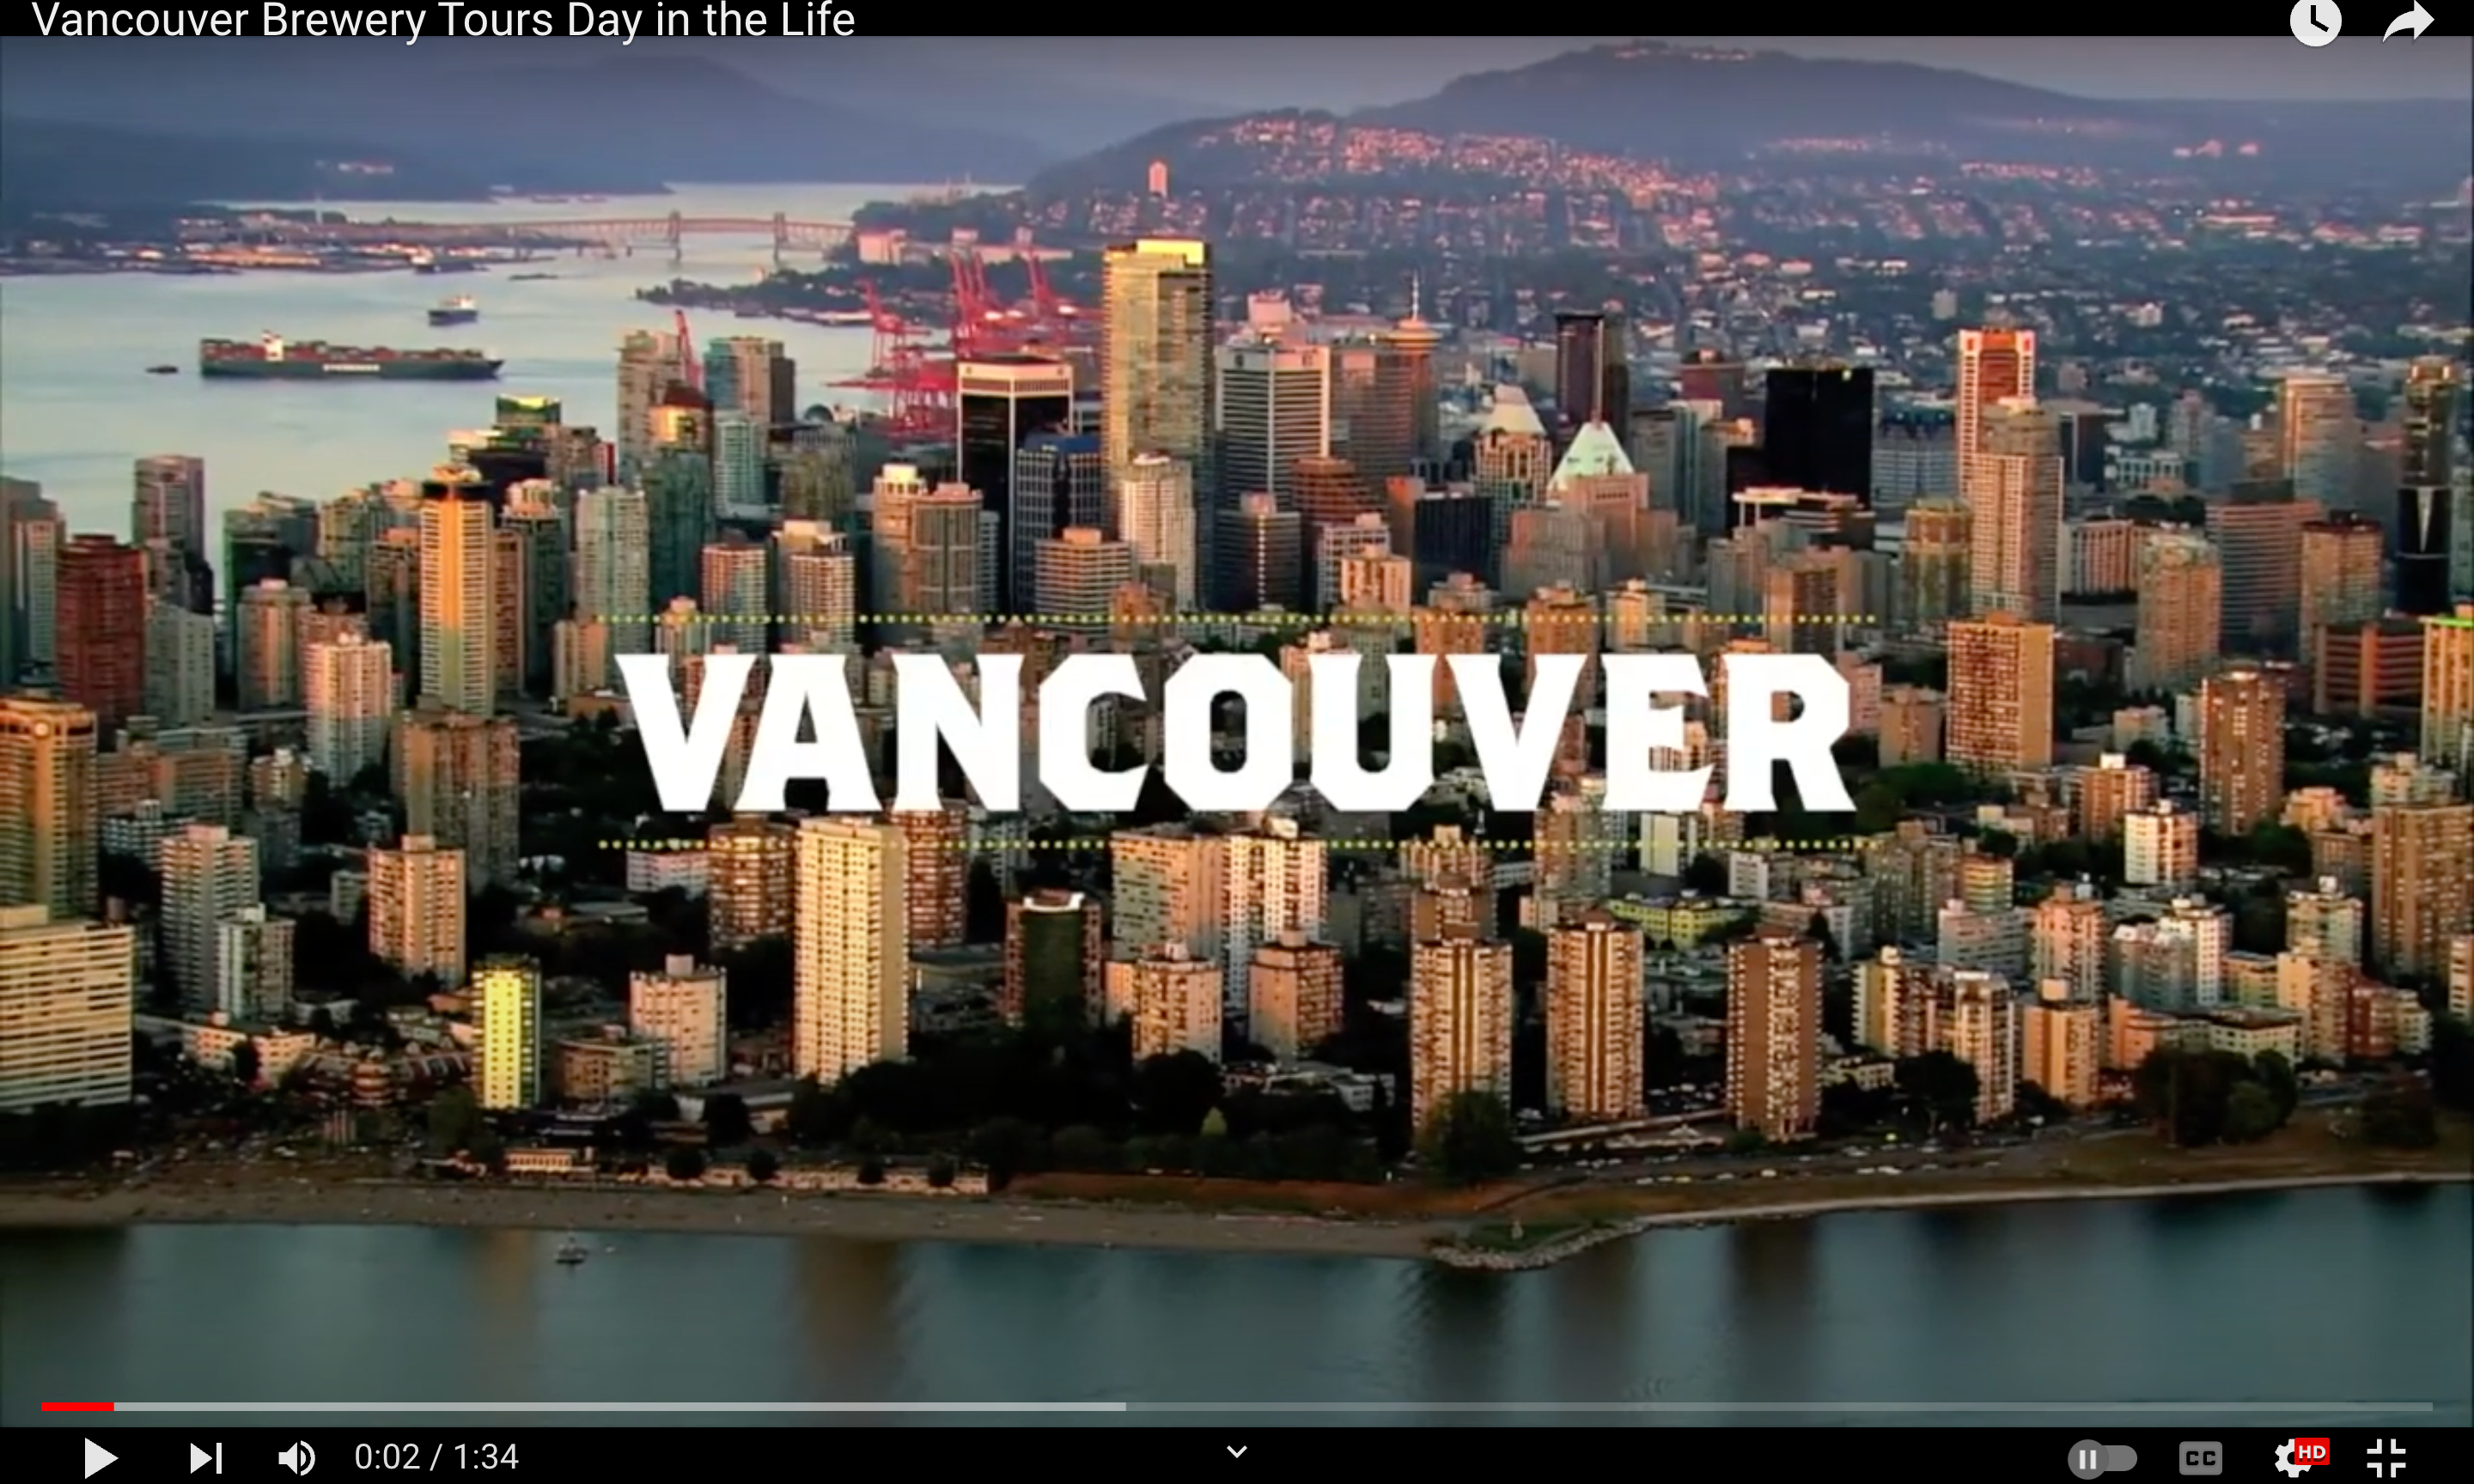 Load video: Brought to you by the same team that does Vancouver Brewery Tours